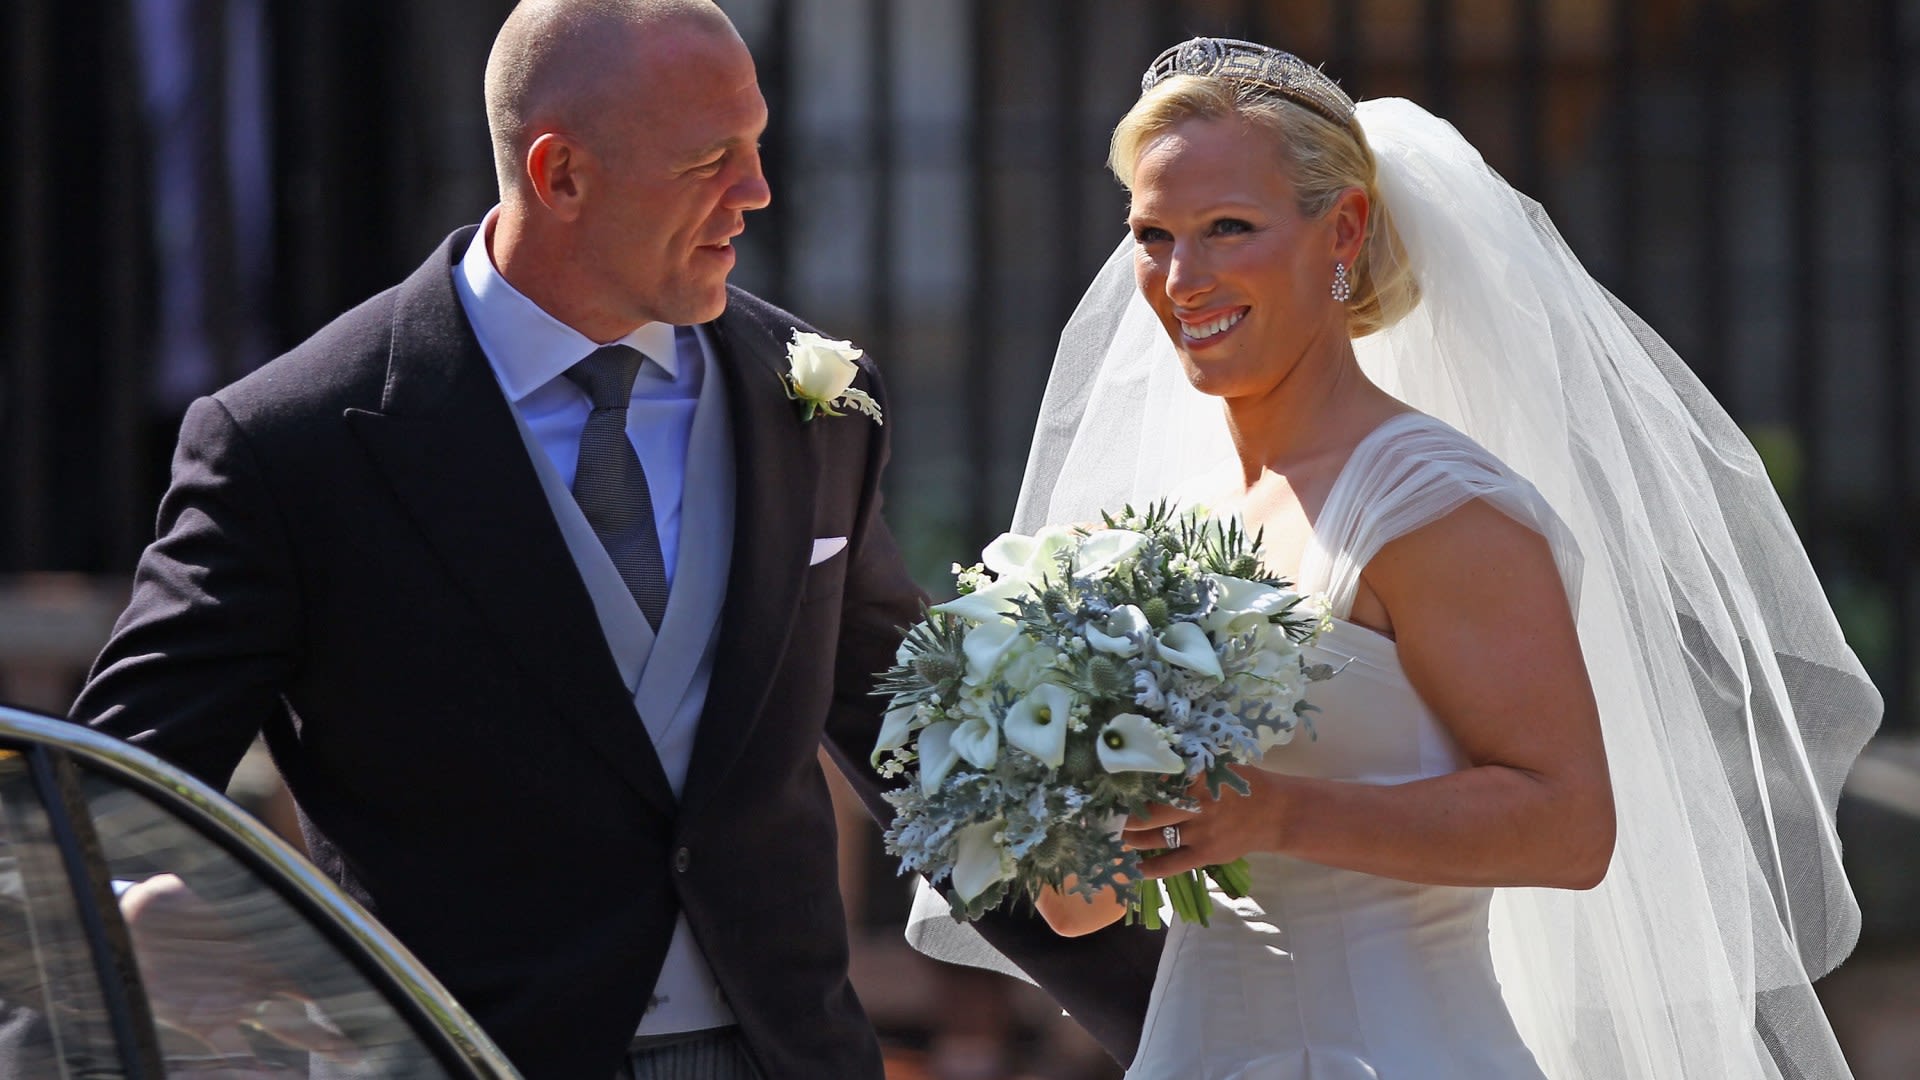 Inside Zara Tindall's 'struggles' with £140k engagement ring